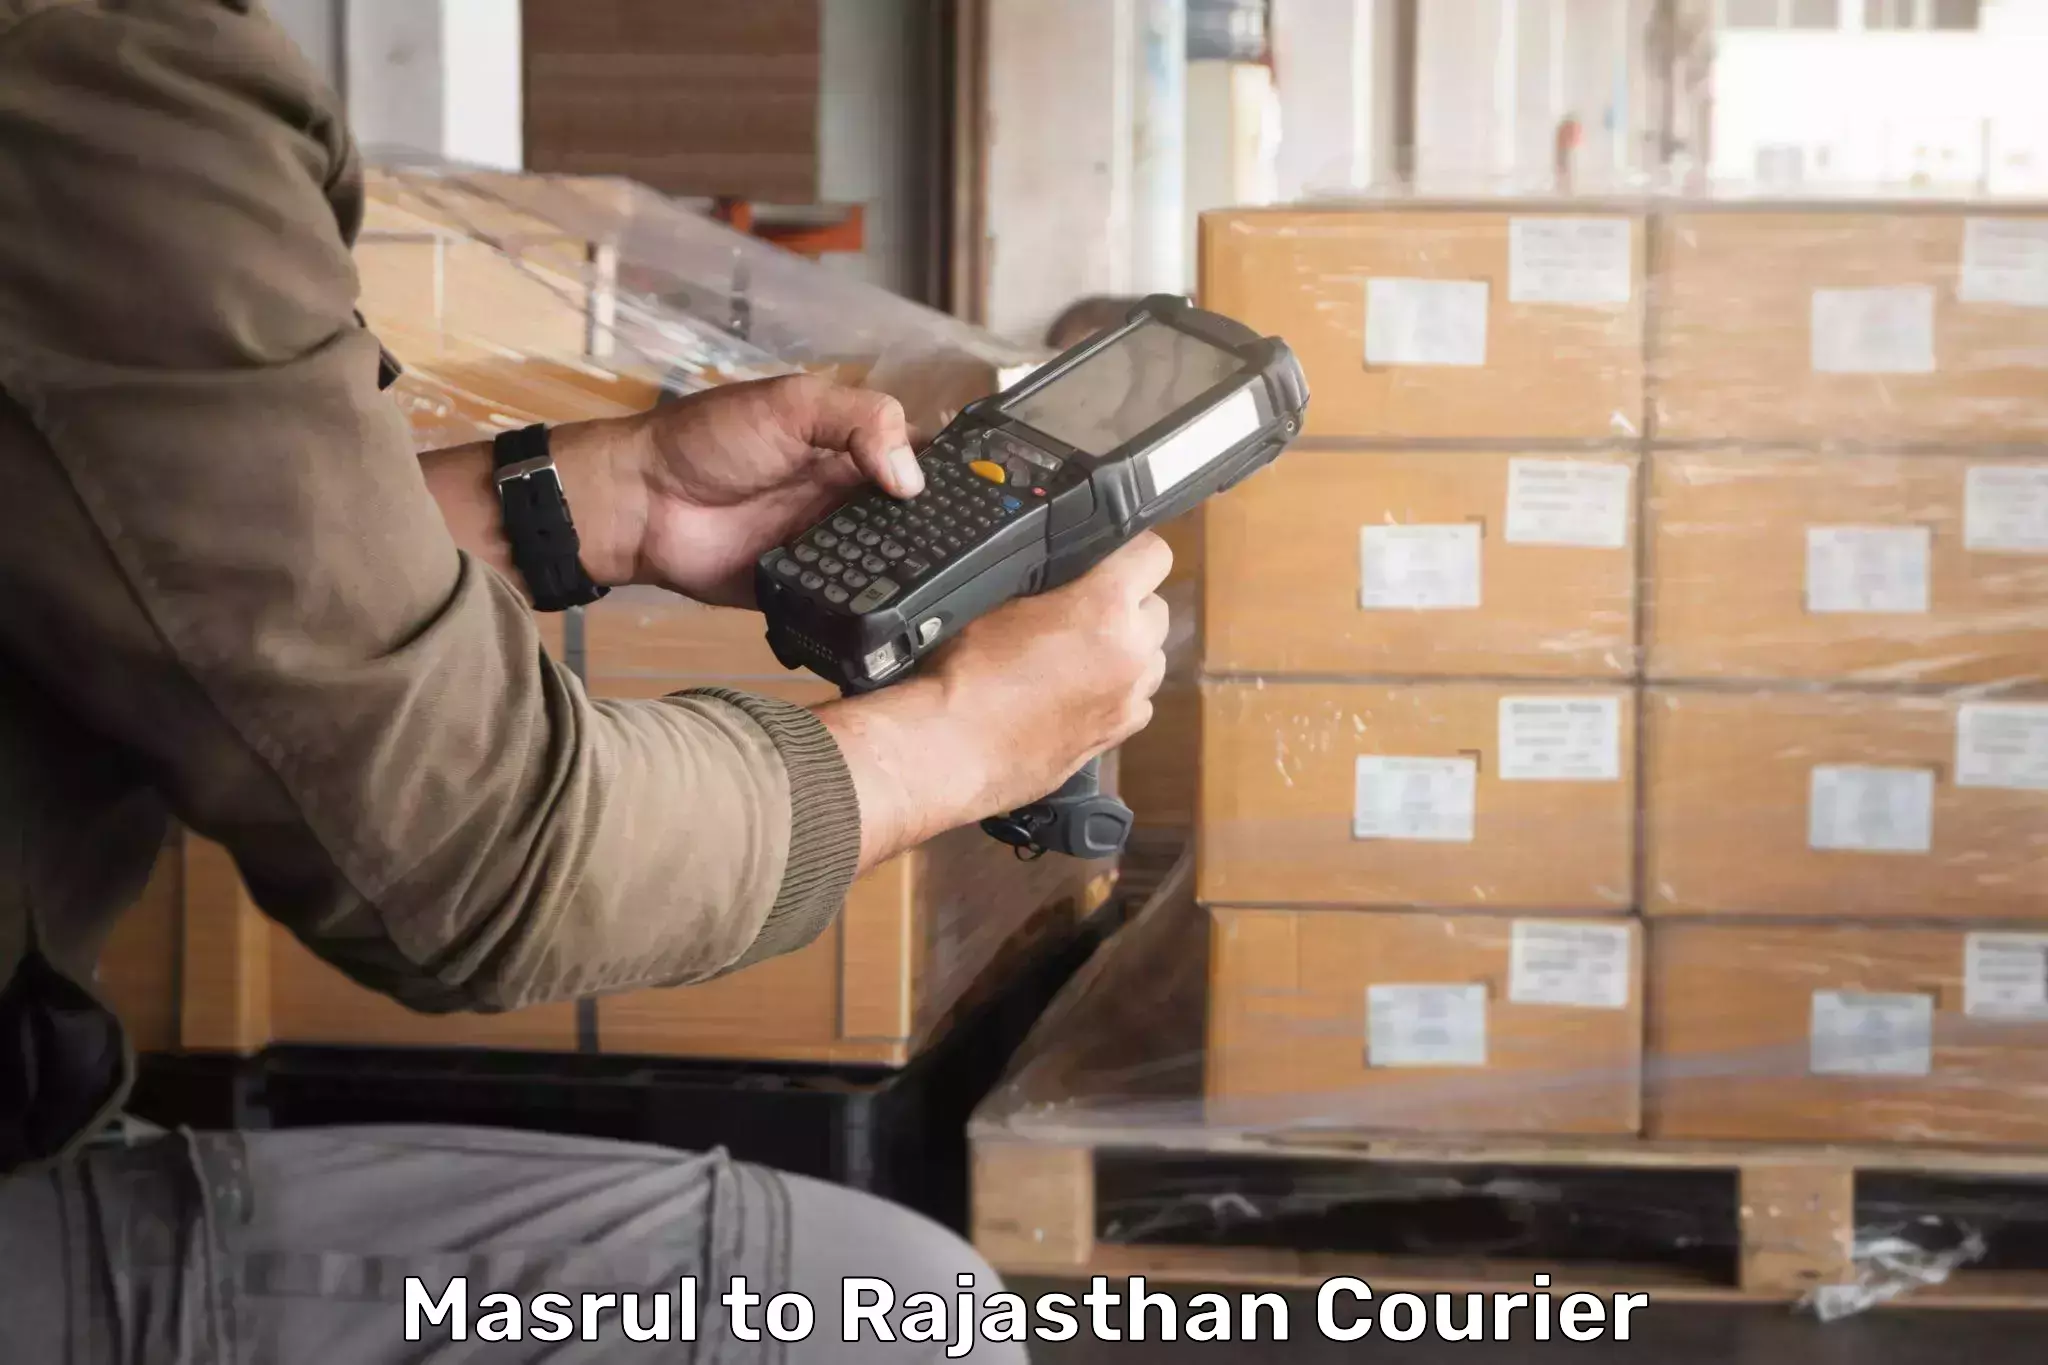 International courier networks Masrul to Rajasthan